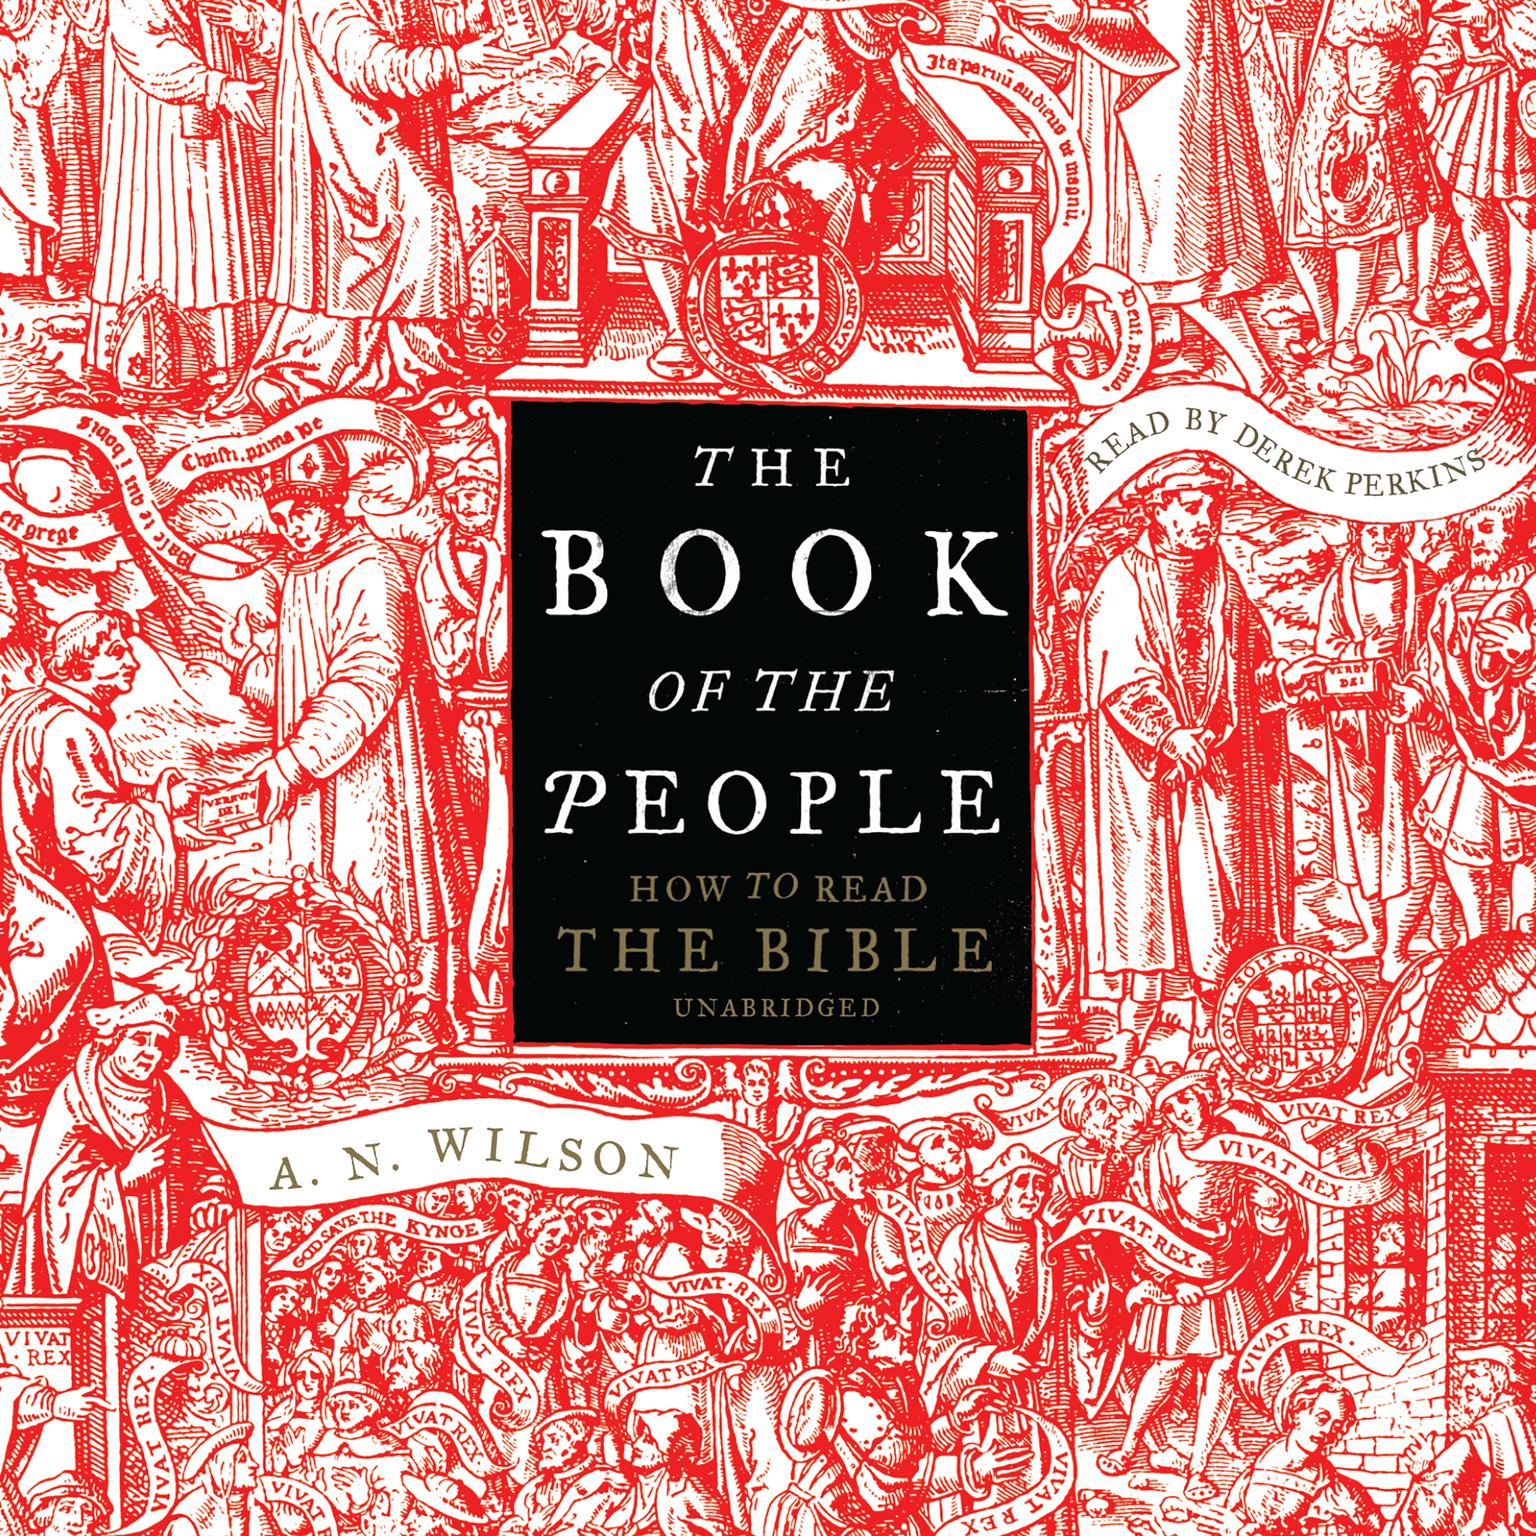 The Book of the People: How to Read the Bible Audiobook, by A. N. Wilson